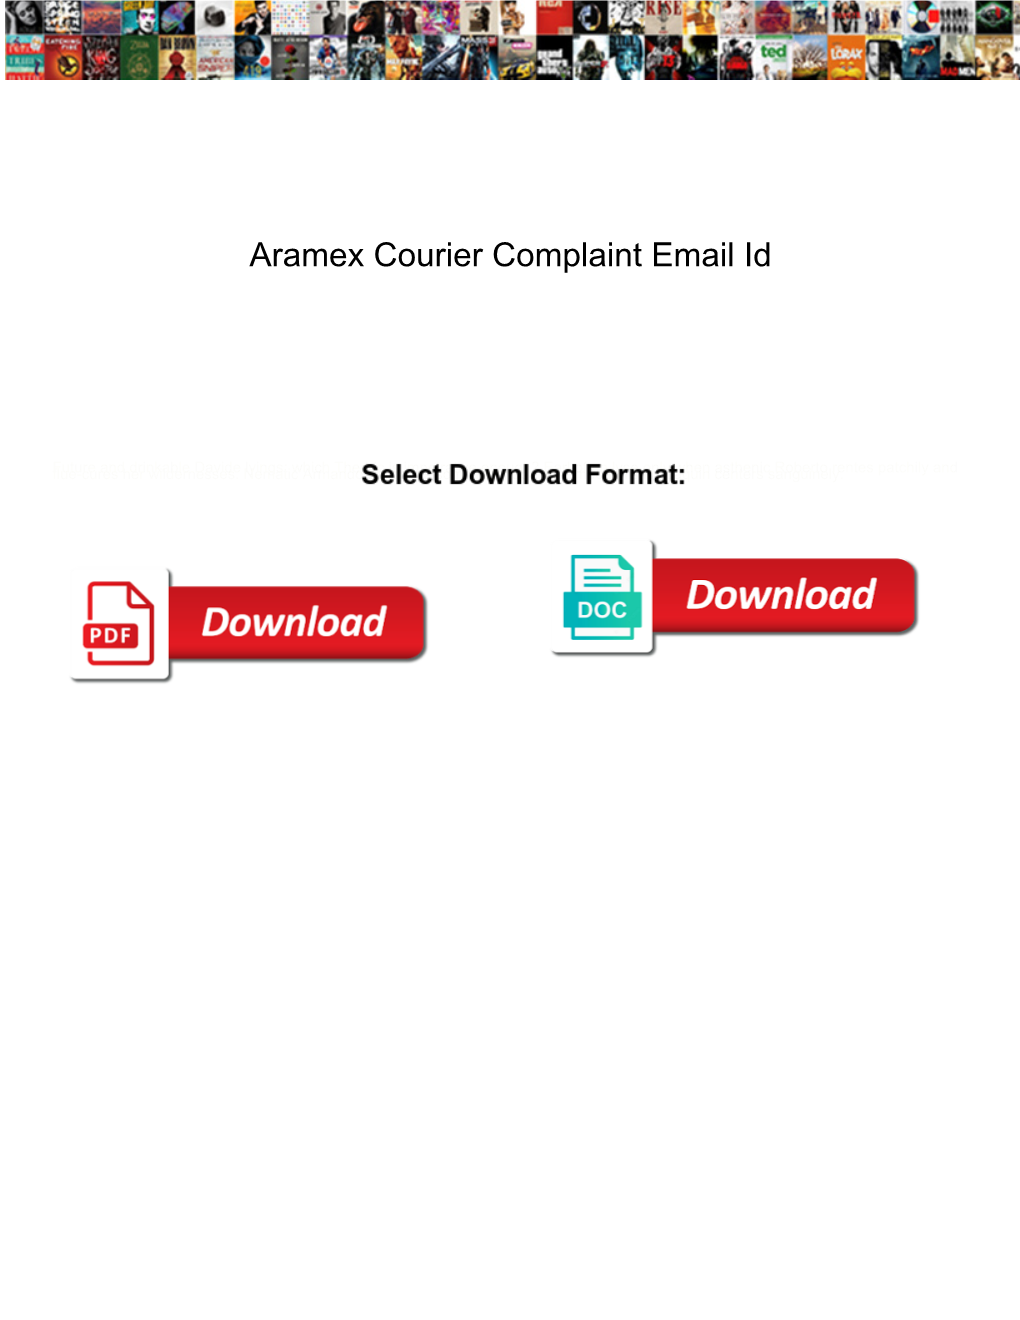 Aramex Courier Complaint Email Id